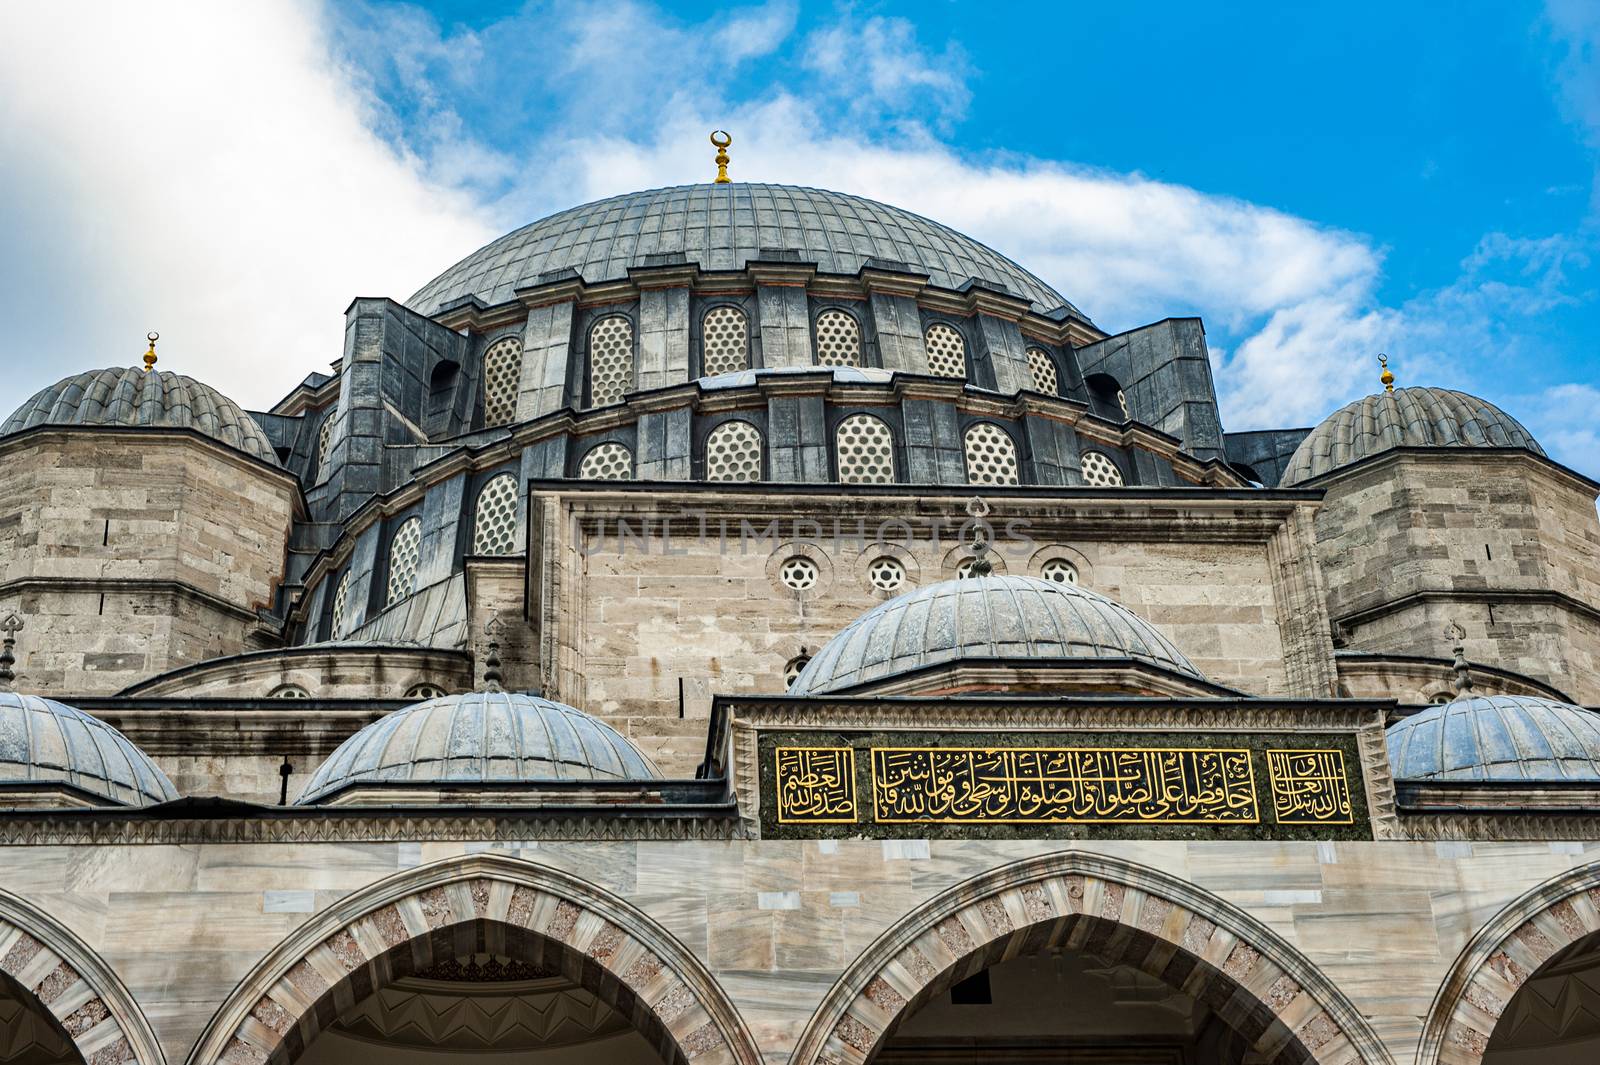 Blue Mosque (Mosque of Sultan Ahmet) in Istanbul, Turkey